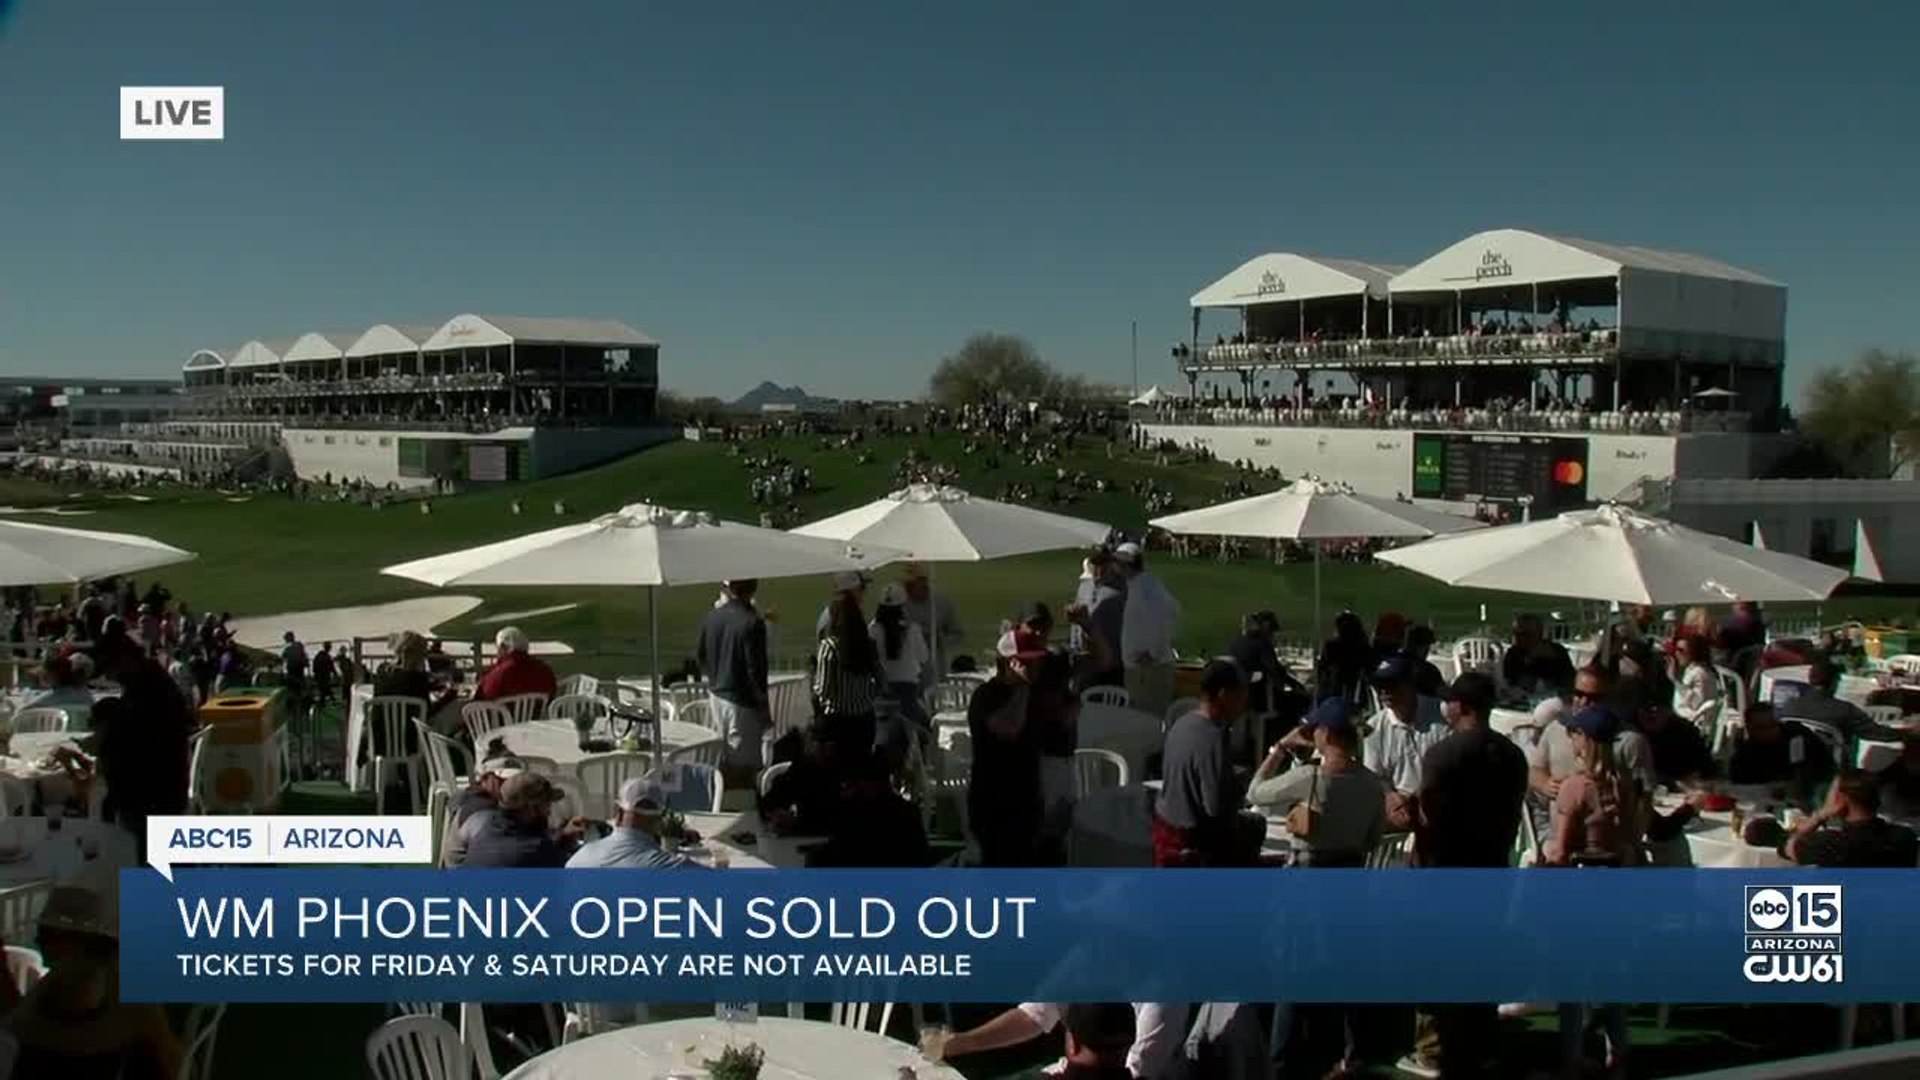 WM Phoenix Open sold out for Friday and Saturday